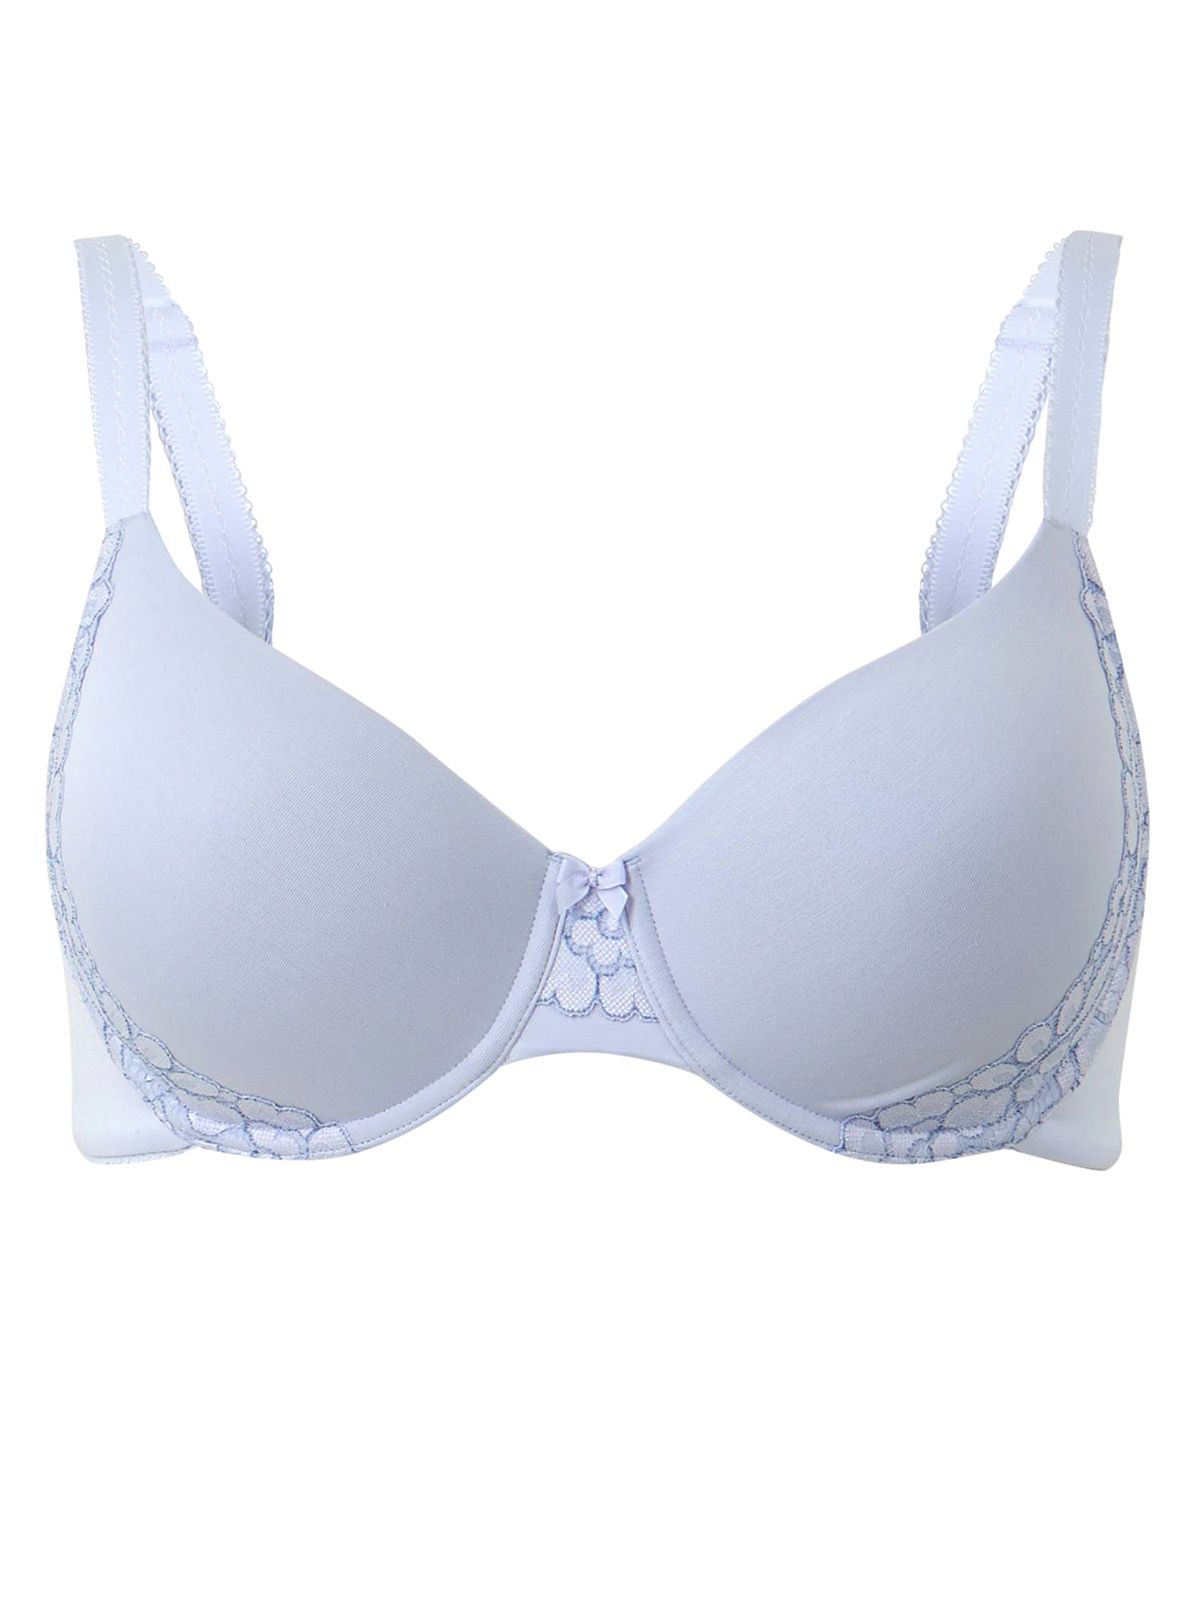 Marks and Spencer - - M&5 ASSORTED Padded Bras - Size 32 to 42 (A-B-C-D ...